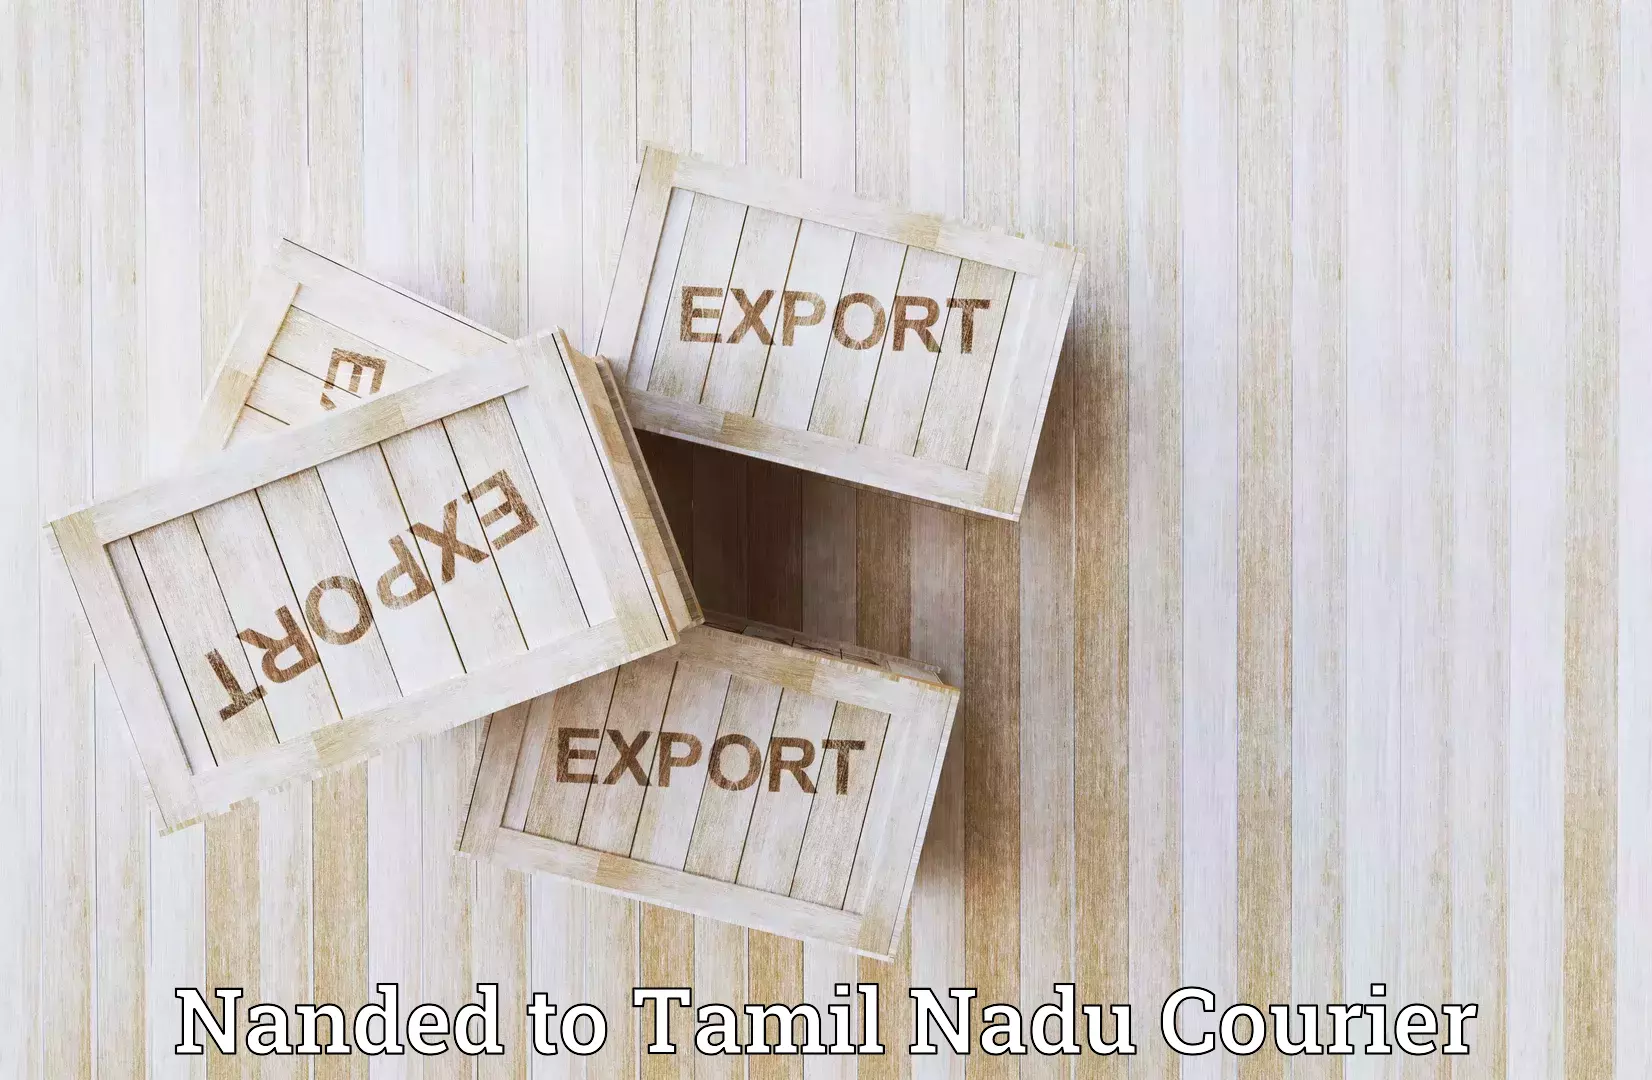 Flexible shipping options Nanded to Chennai Port